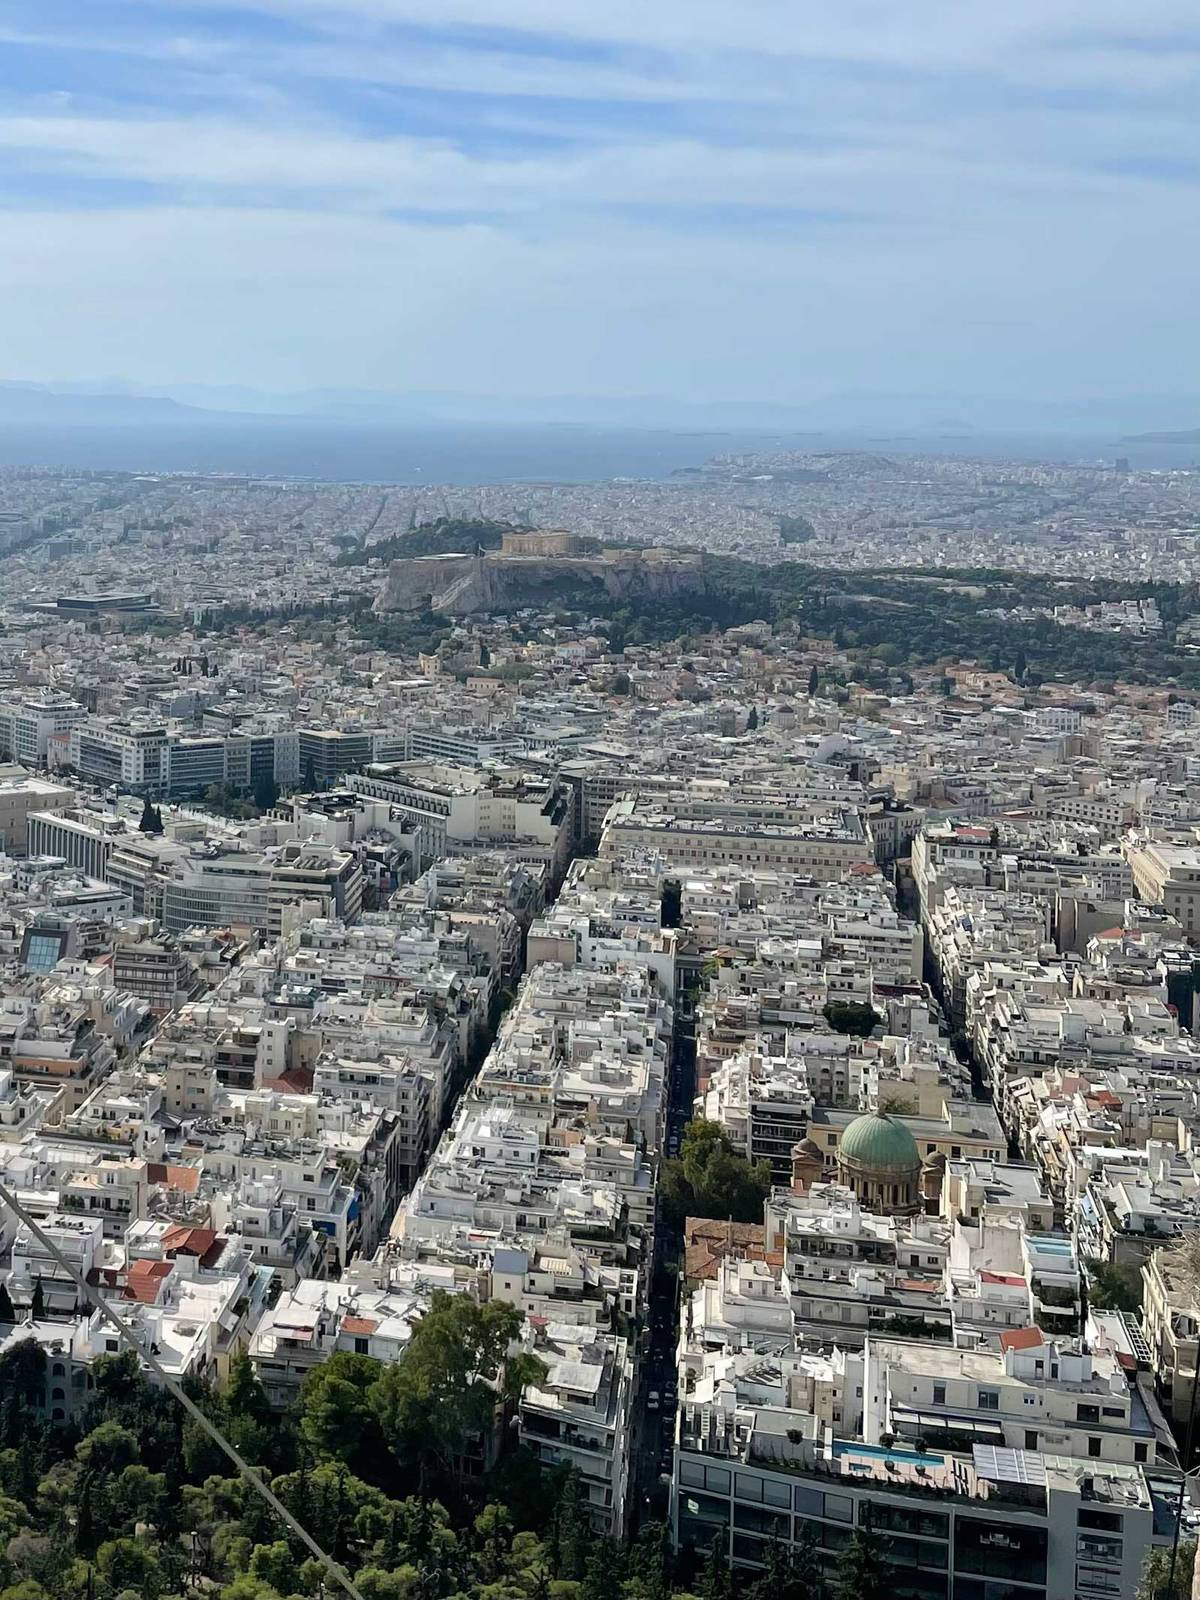 The view of Athens from Lycabettus Hill